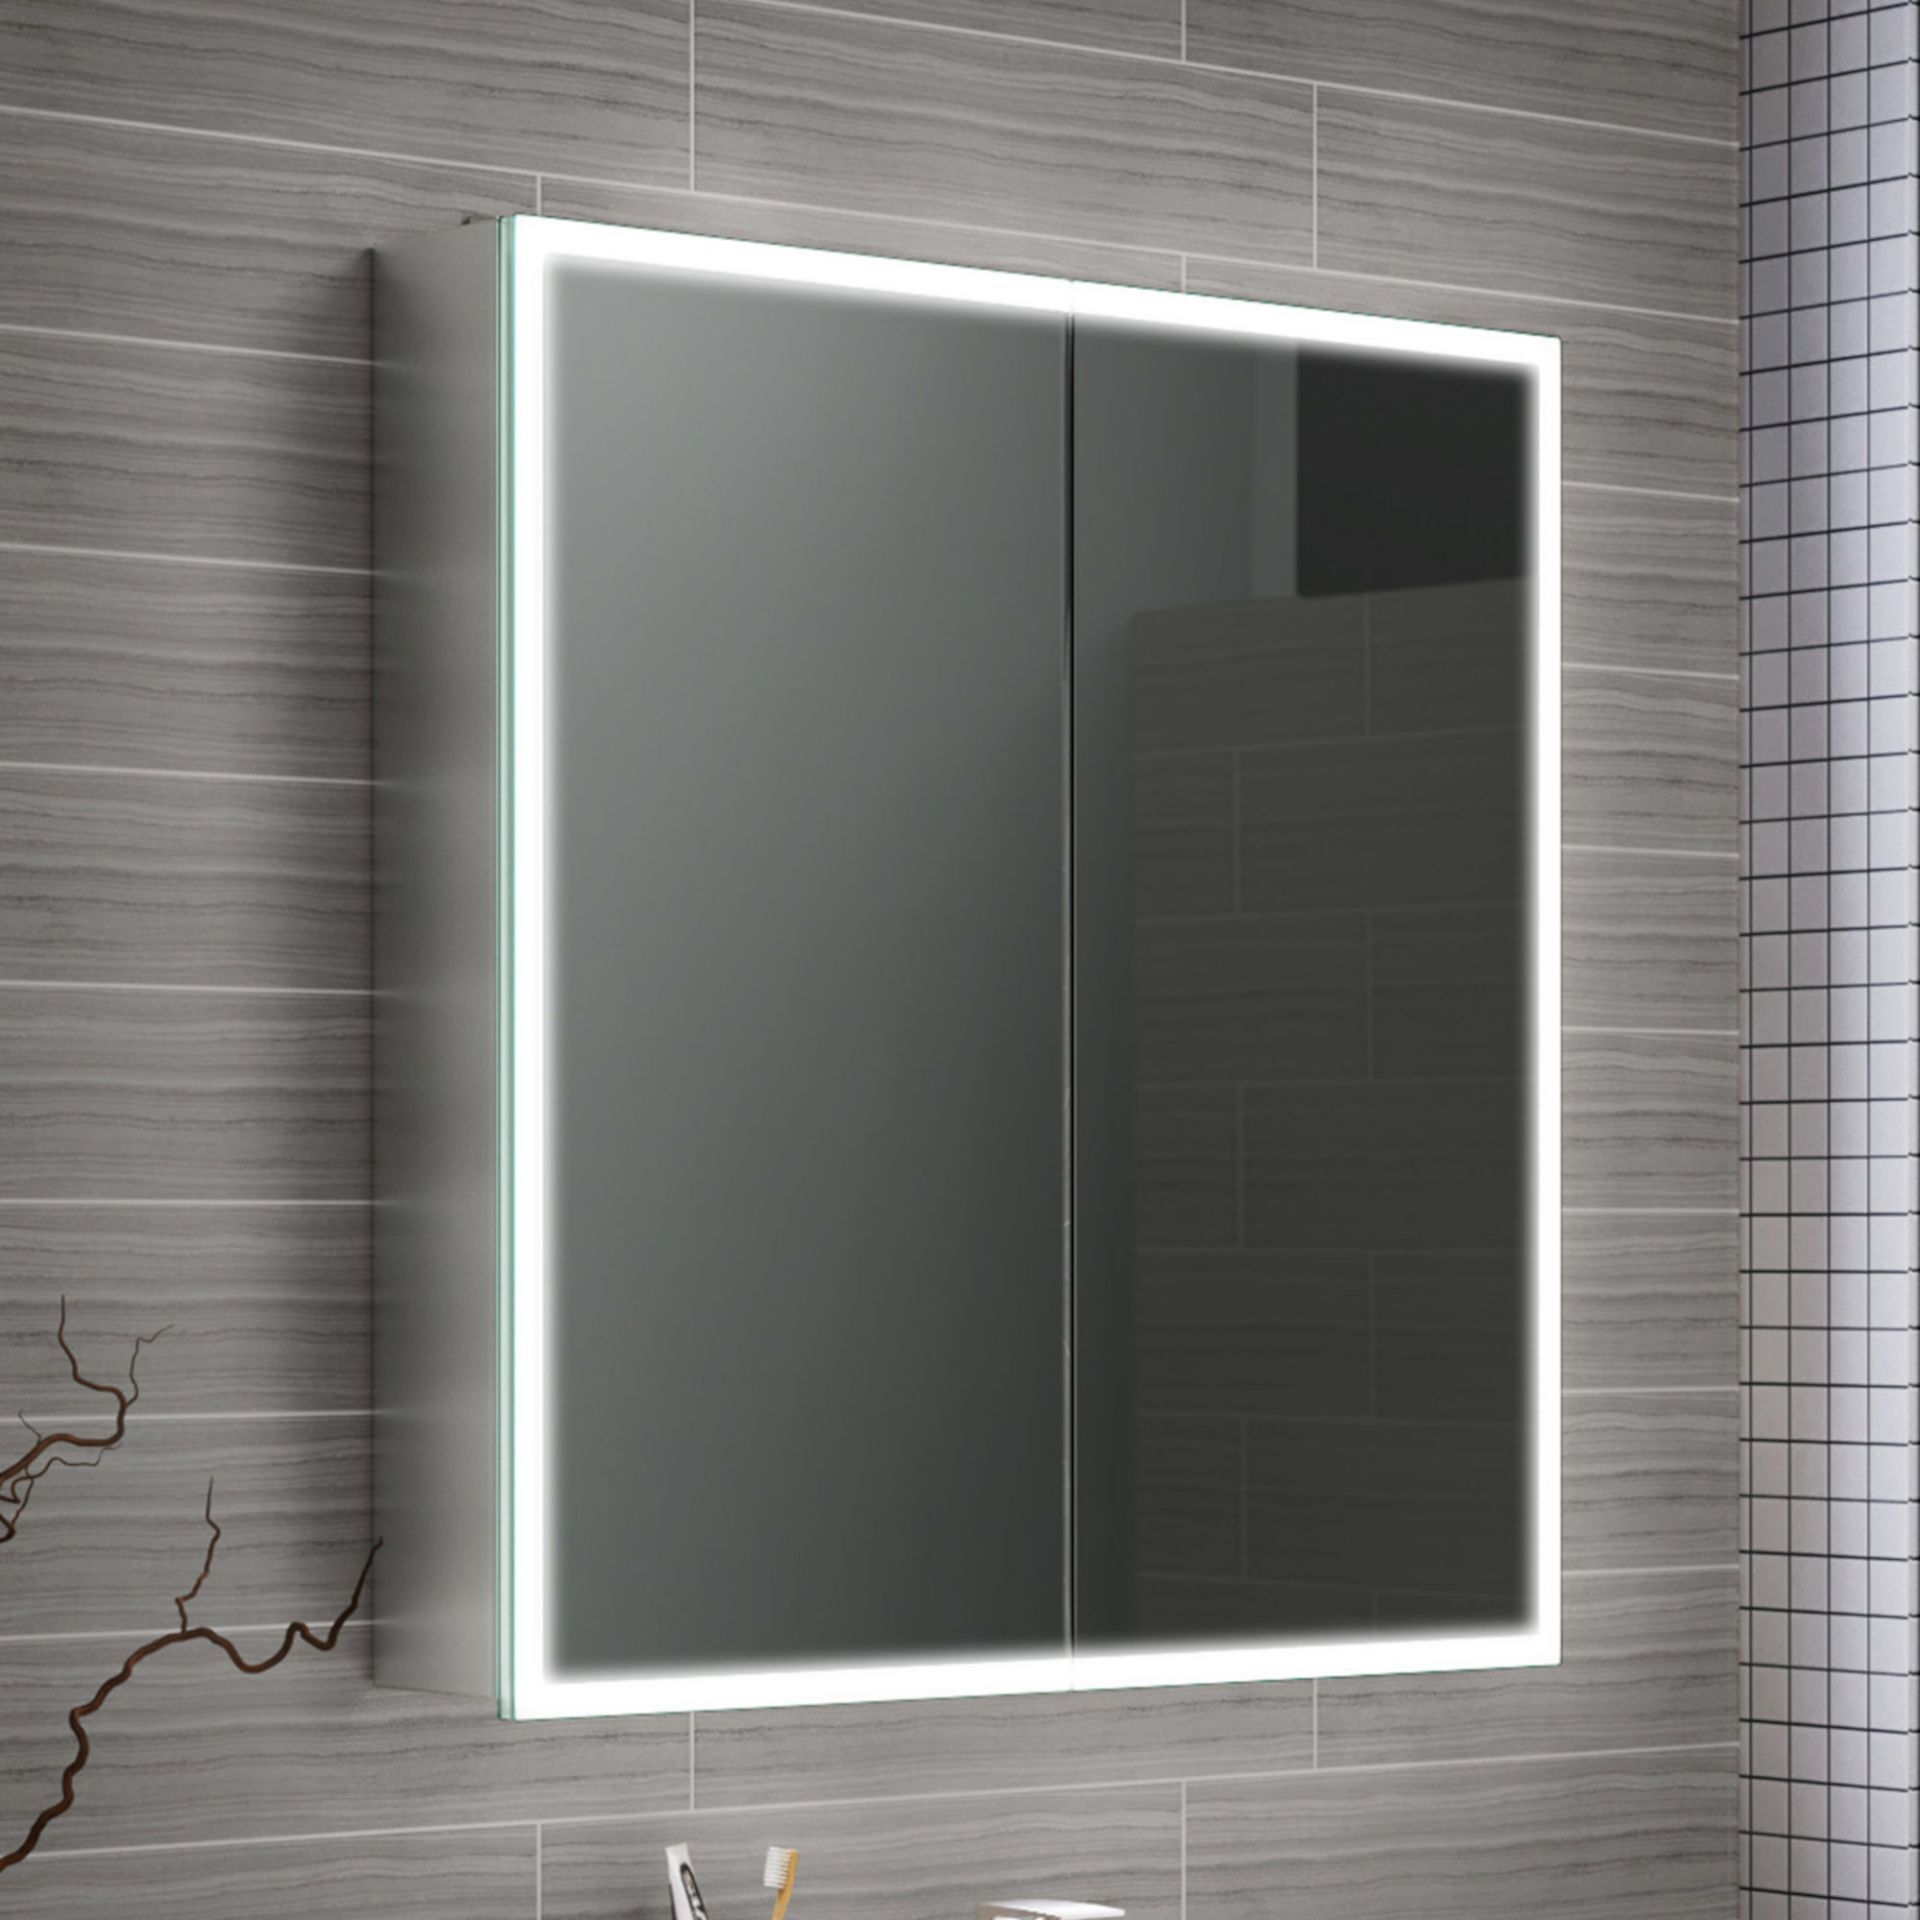 New 650 x 700 Cosmica Illuminated Led Mirror Cabinet.RRP £924.99.Mc162.We Love This Mirror Cabinet